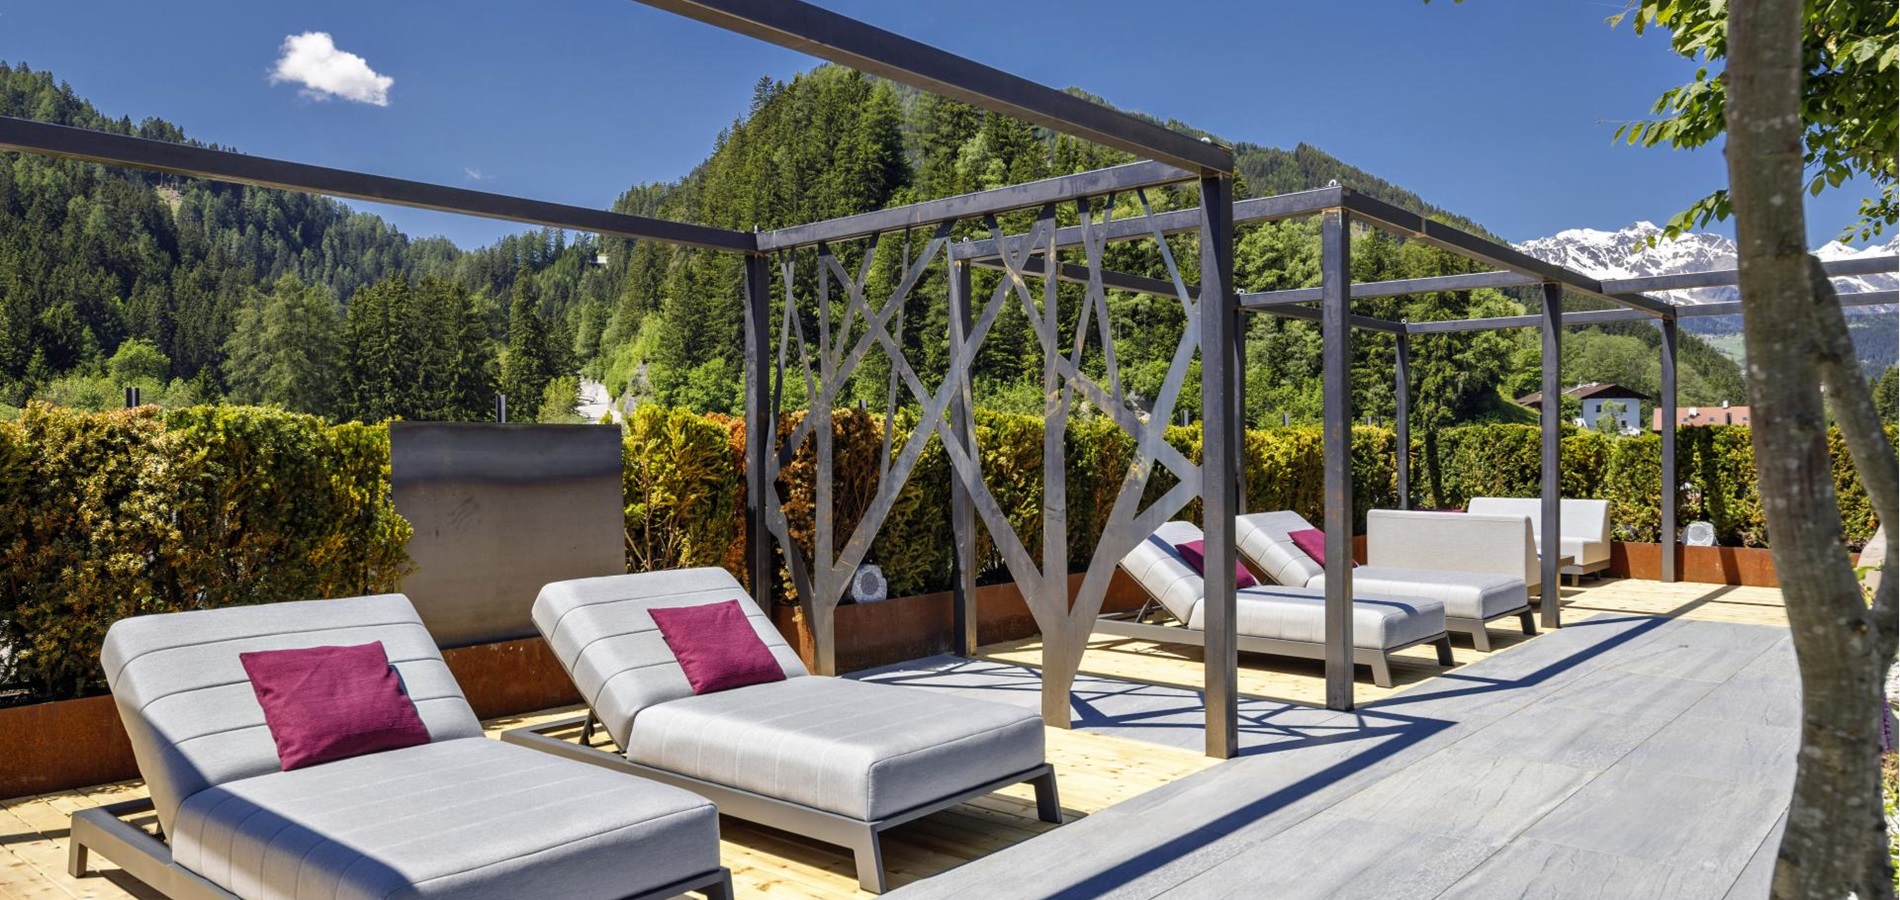 Loungers on the rooftop terrace